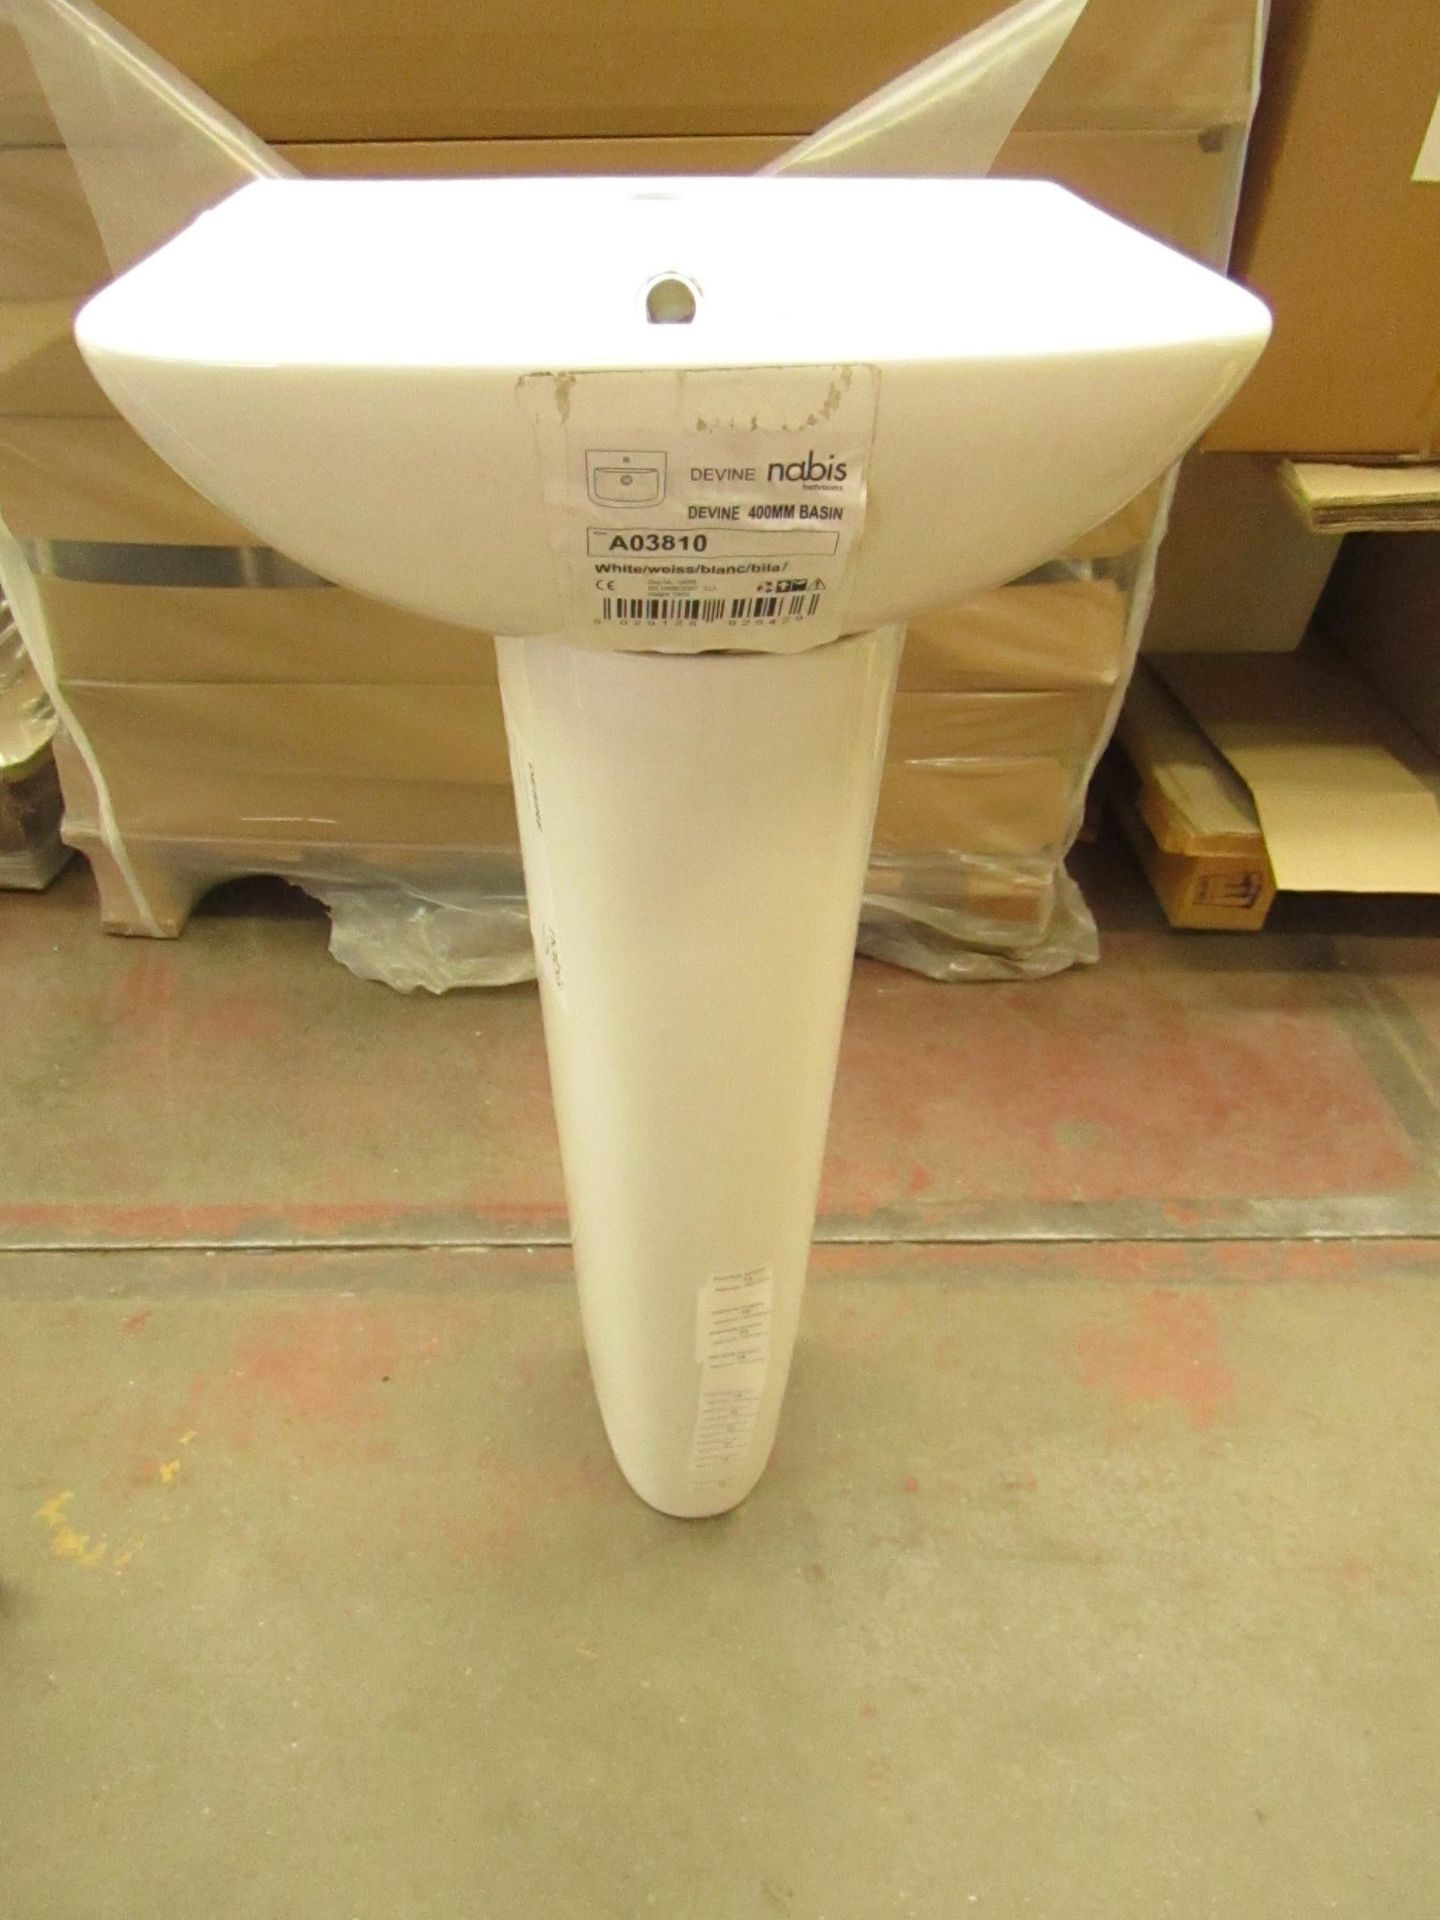 Nabis Devine 400mm 1TH basin with full pedestal, both new.